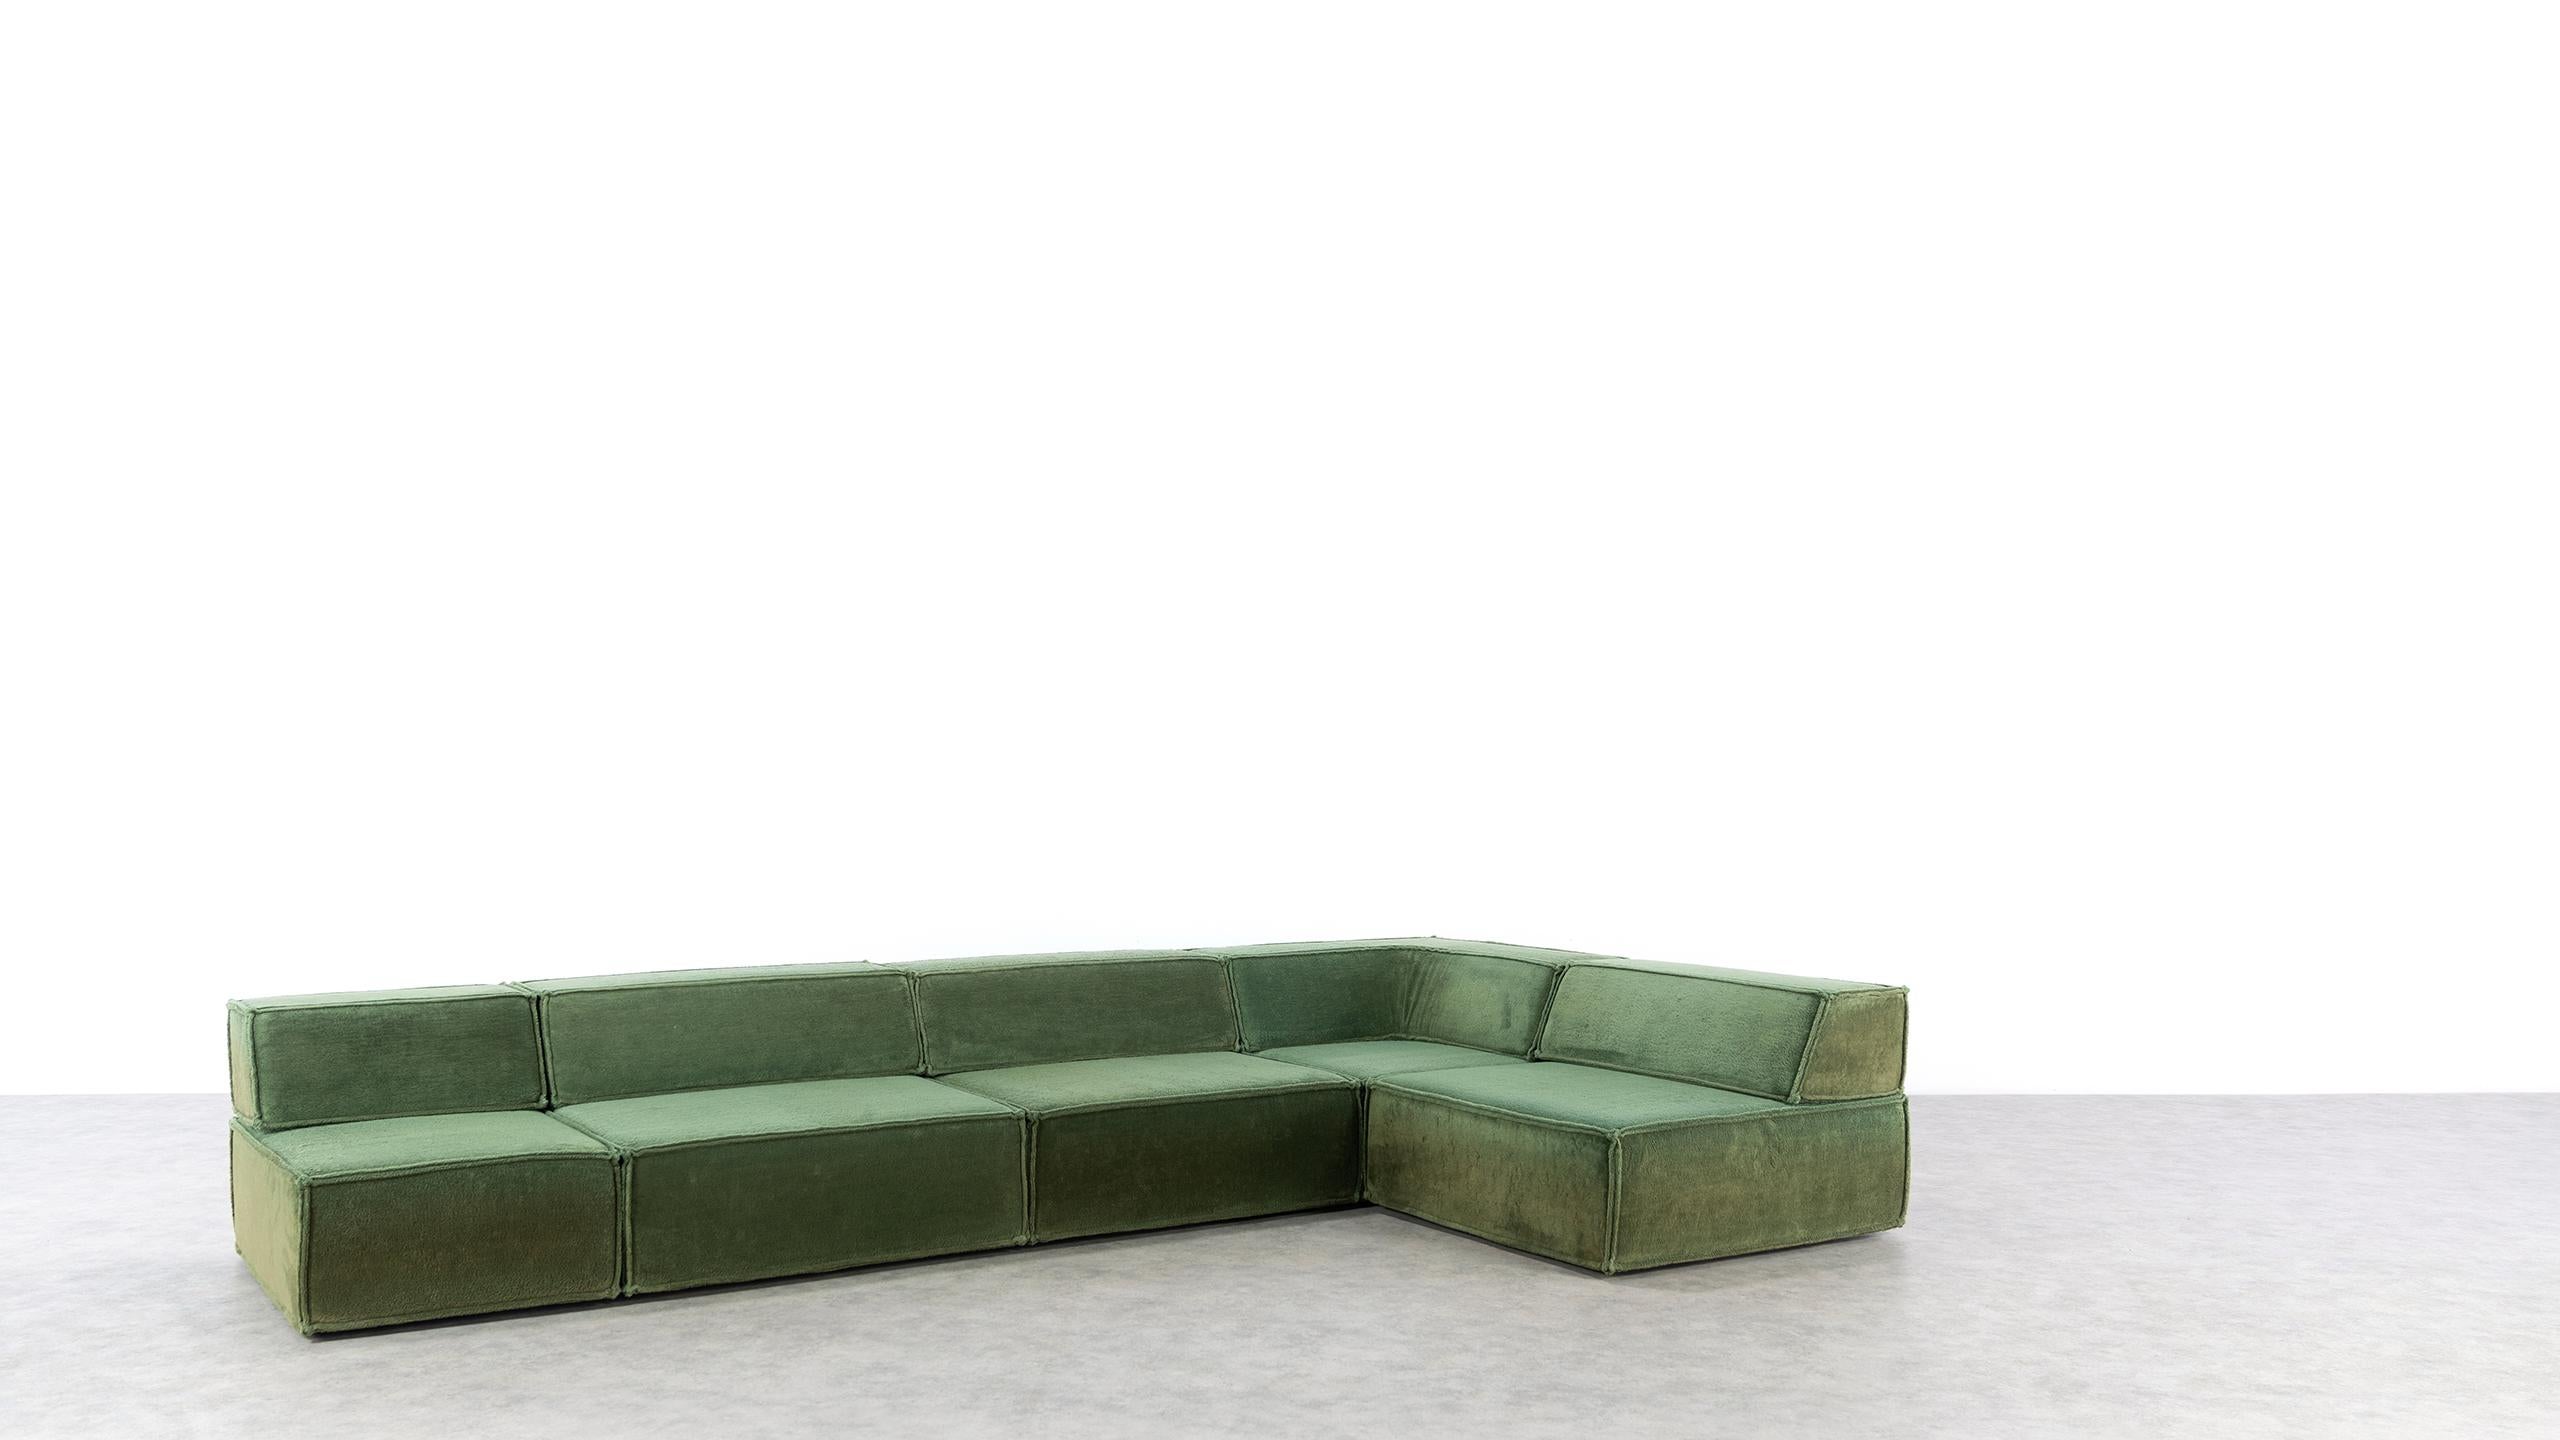 COR Trio Modular Sofa, Giant Landscape in Green, 1972 by Team Form AG, Swiss 6